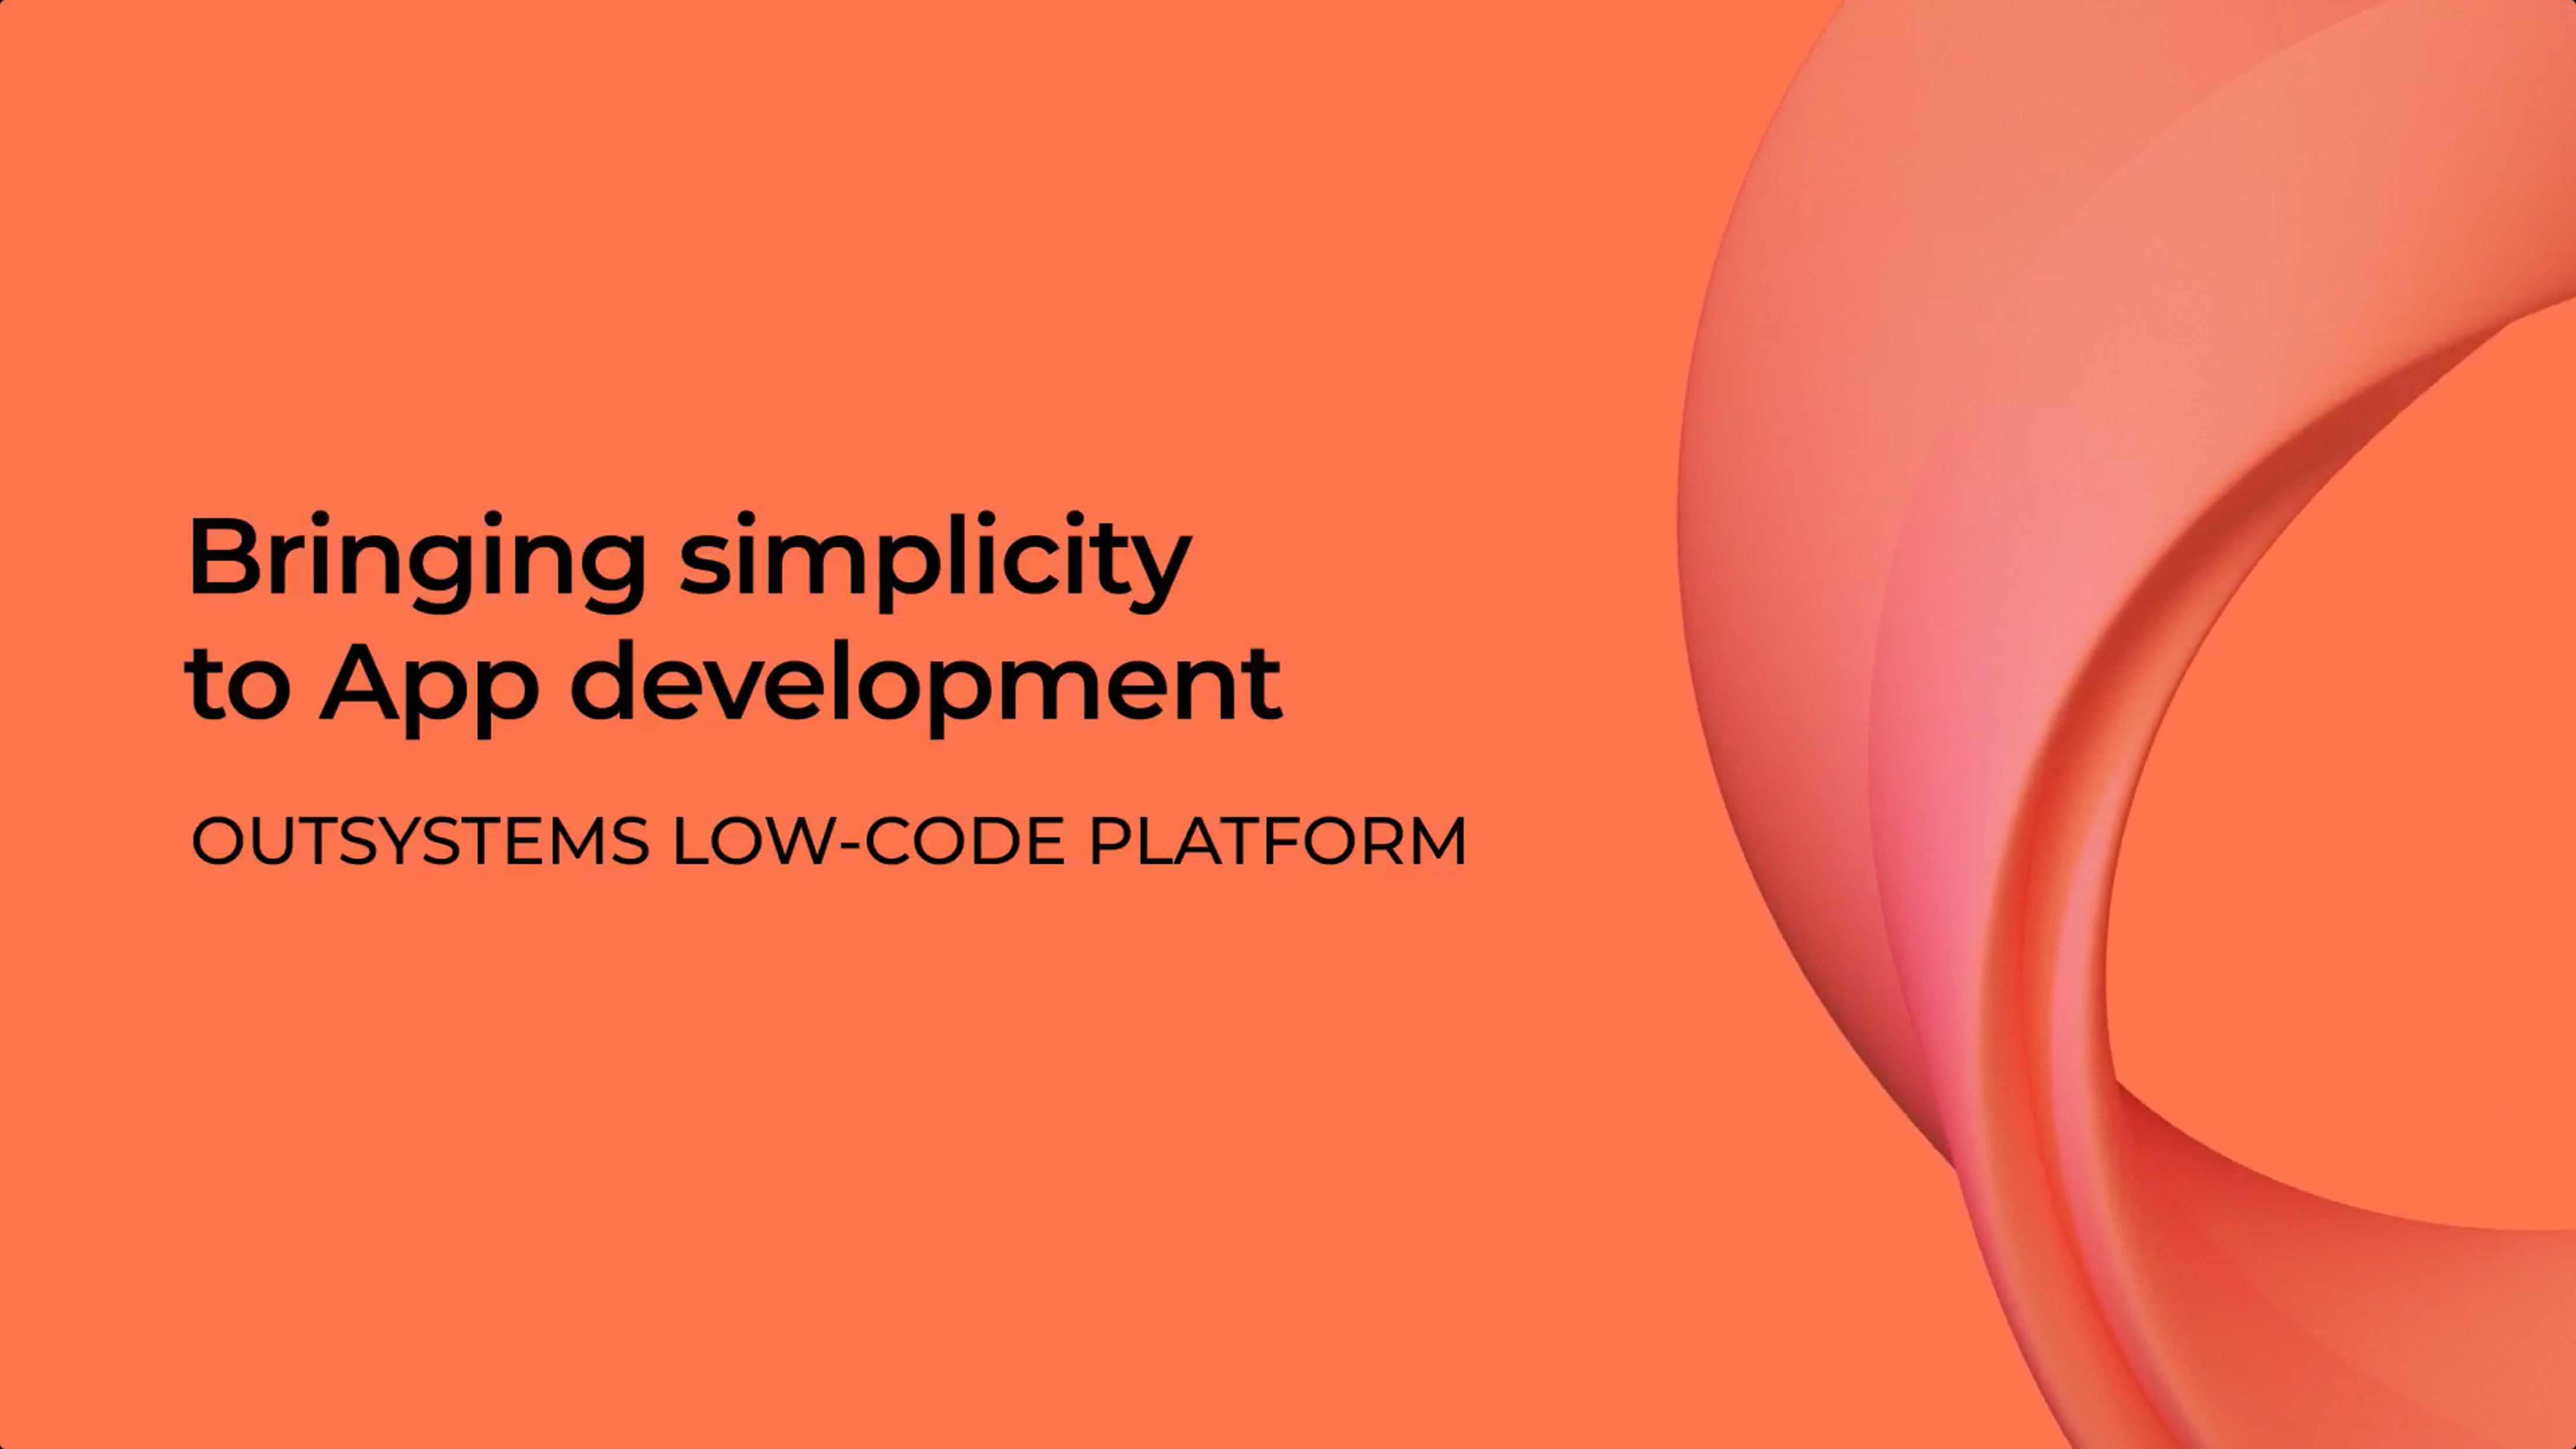 Bring simplicity to app development using Outsystems low-code platform